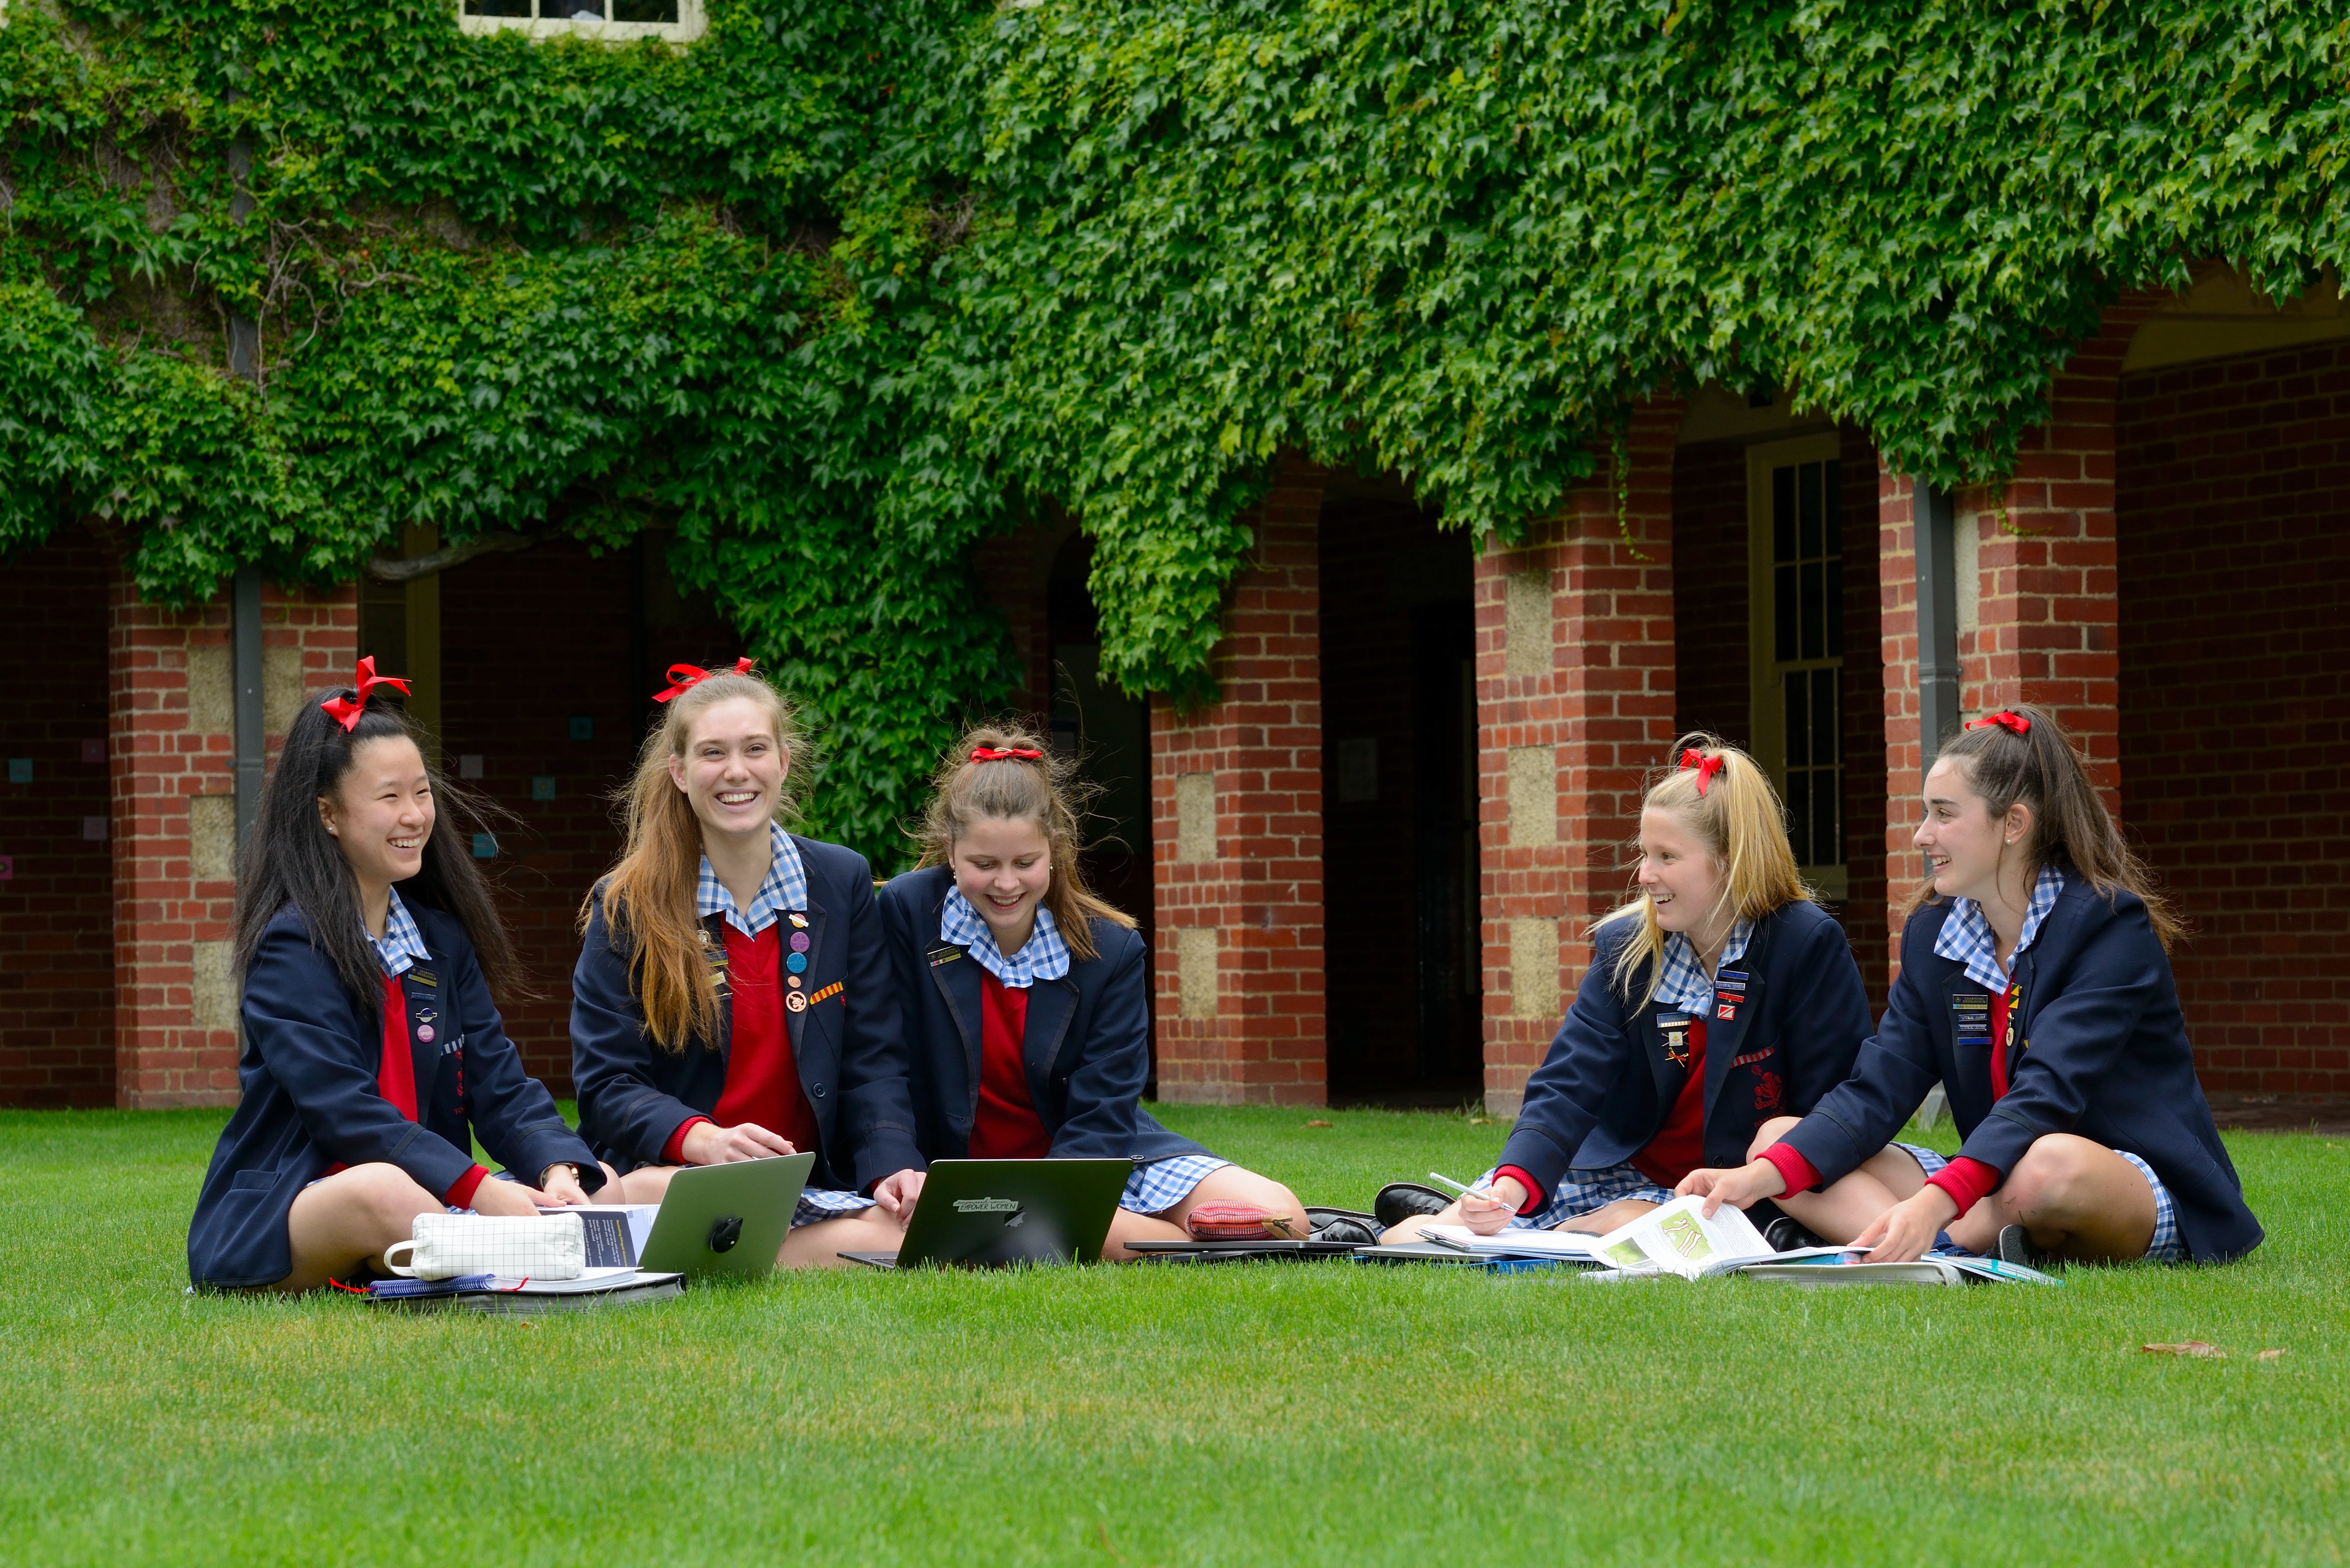 Find Your Shine at Toorak College 